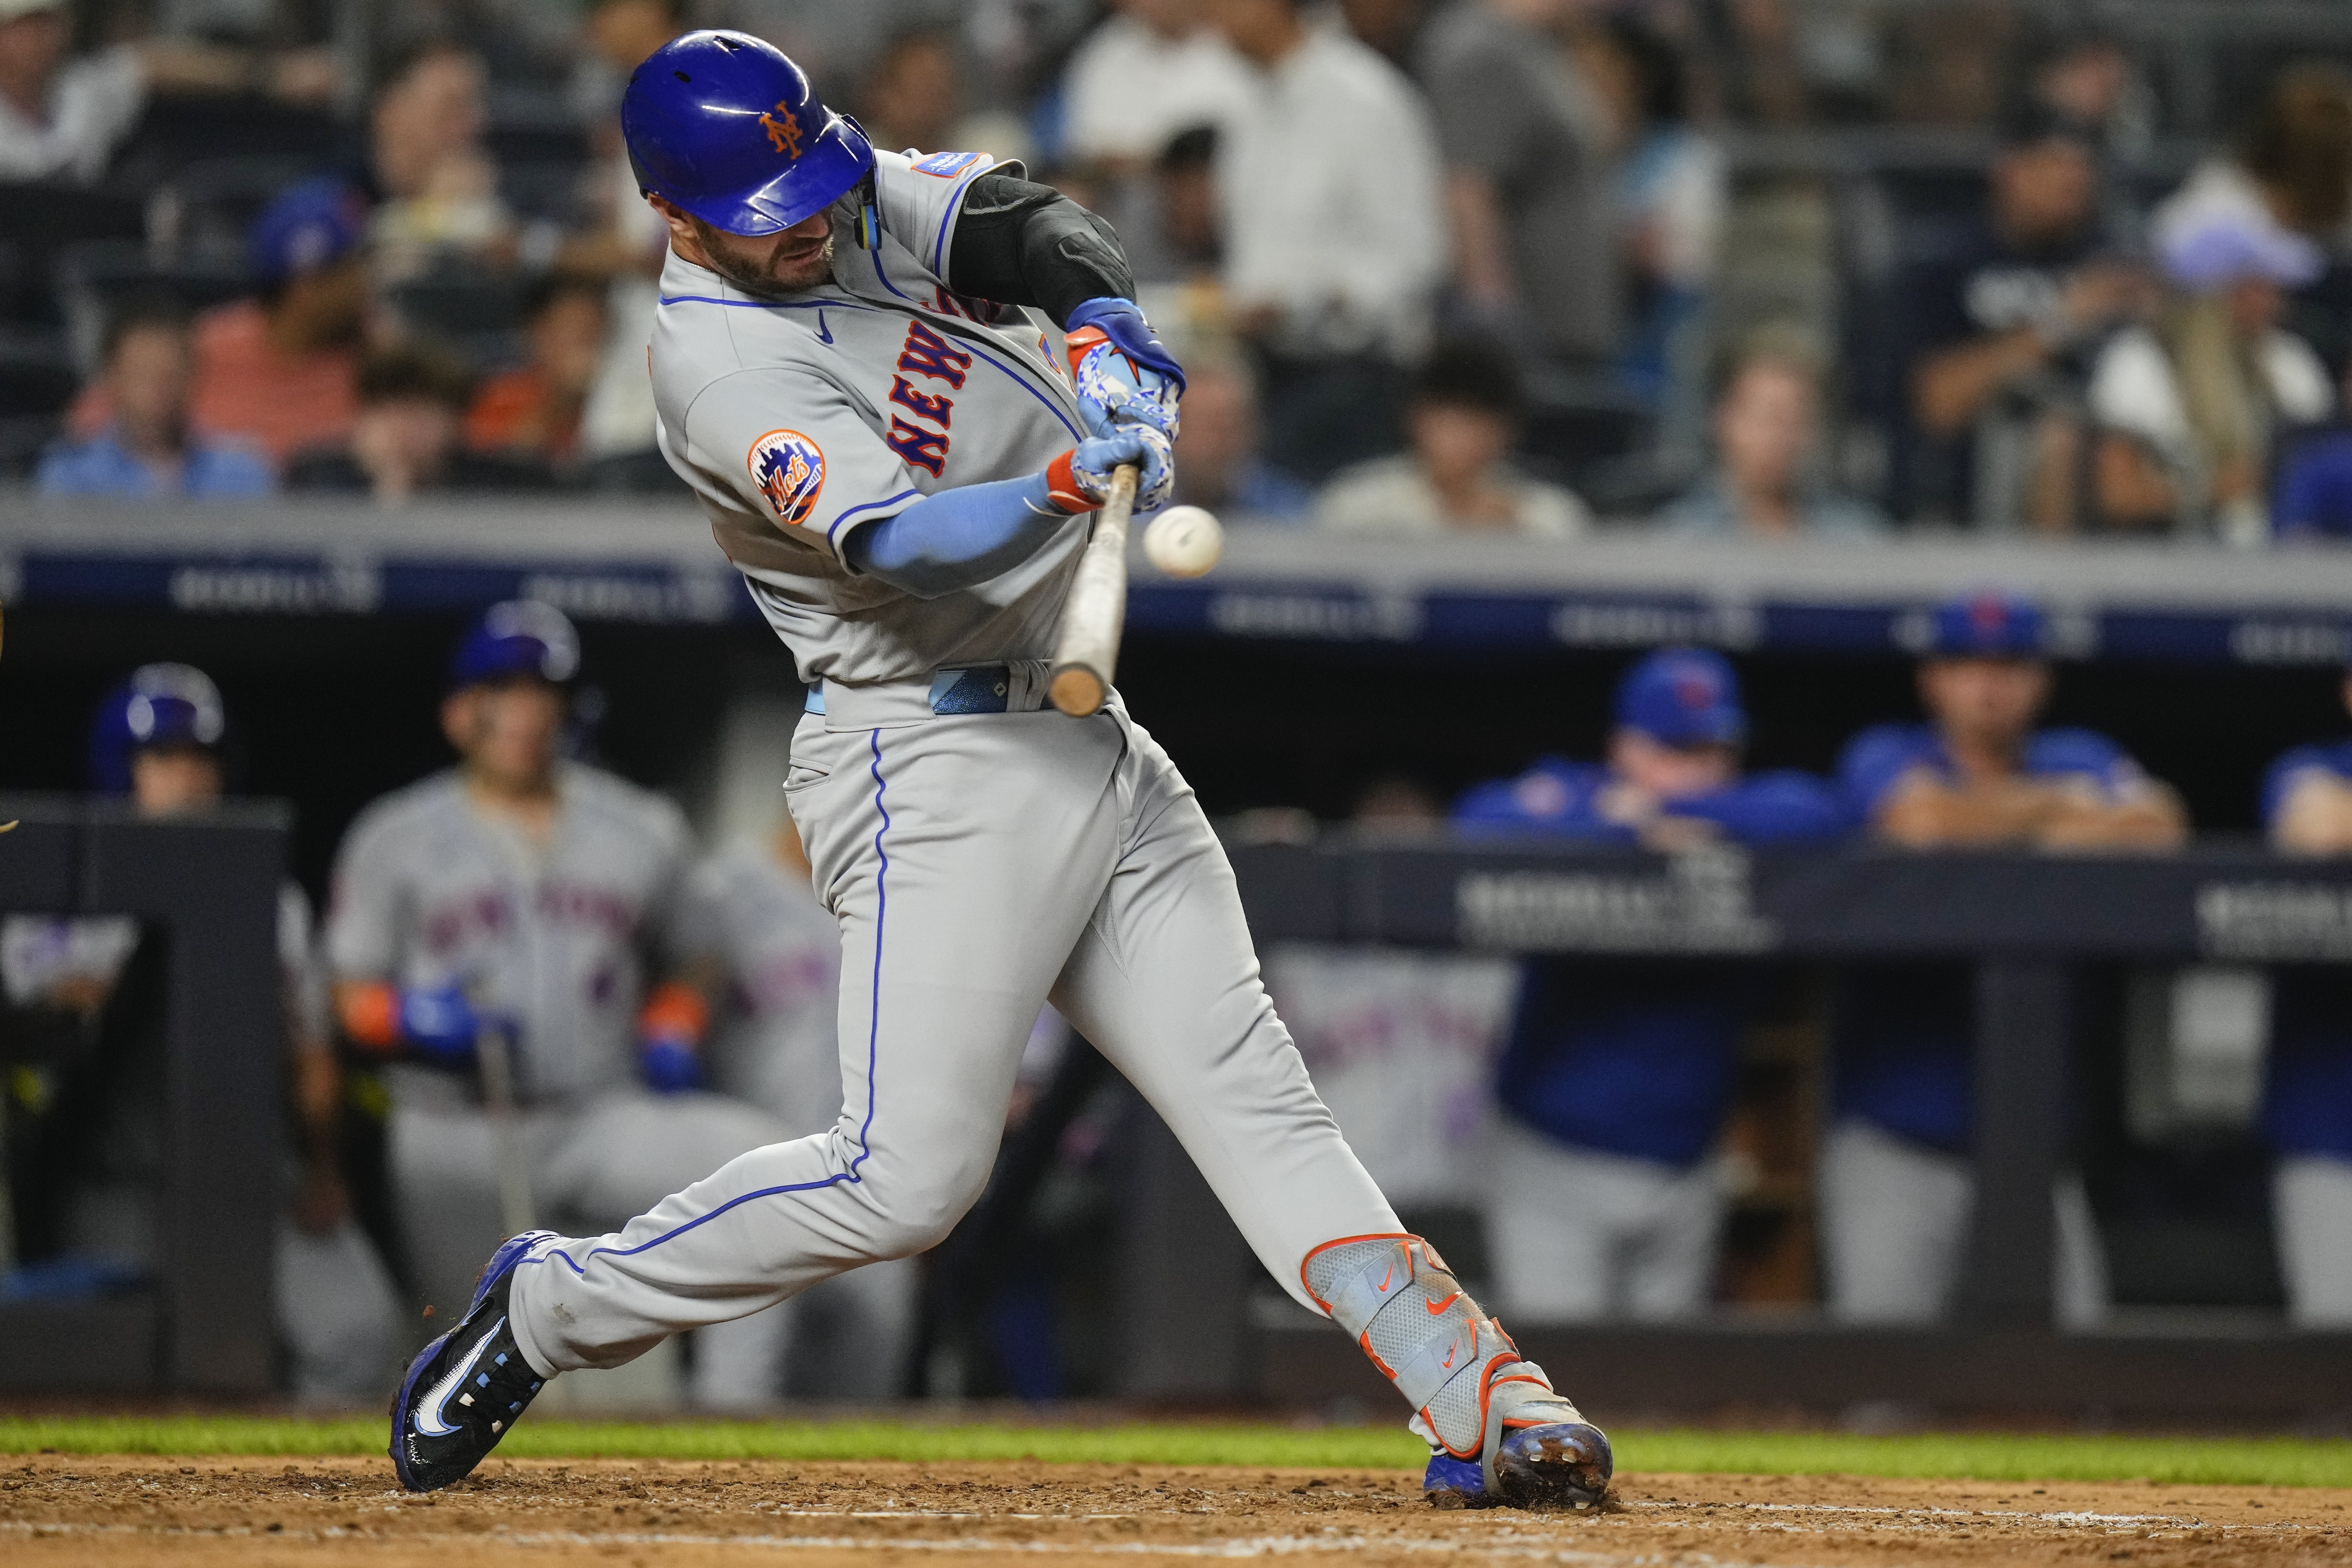 Subway Series 2022 live updates: Mets take Game 1 from Yankees